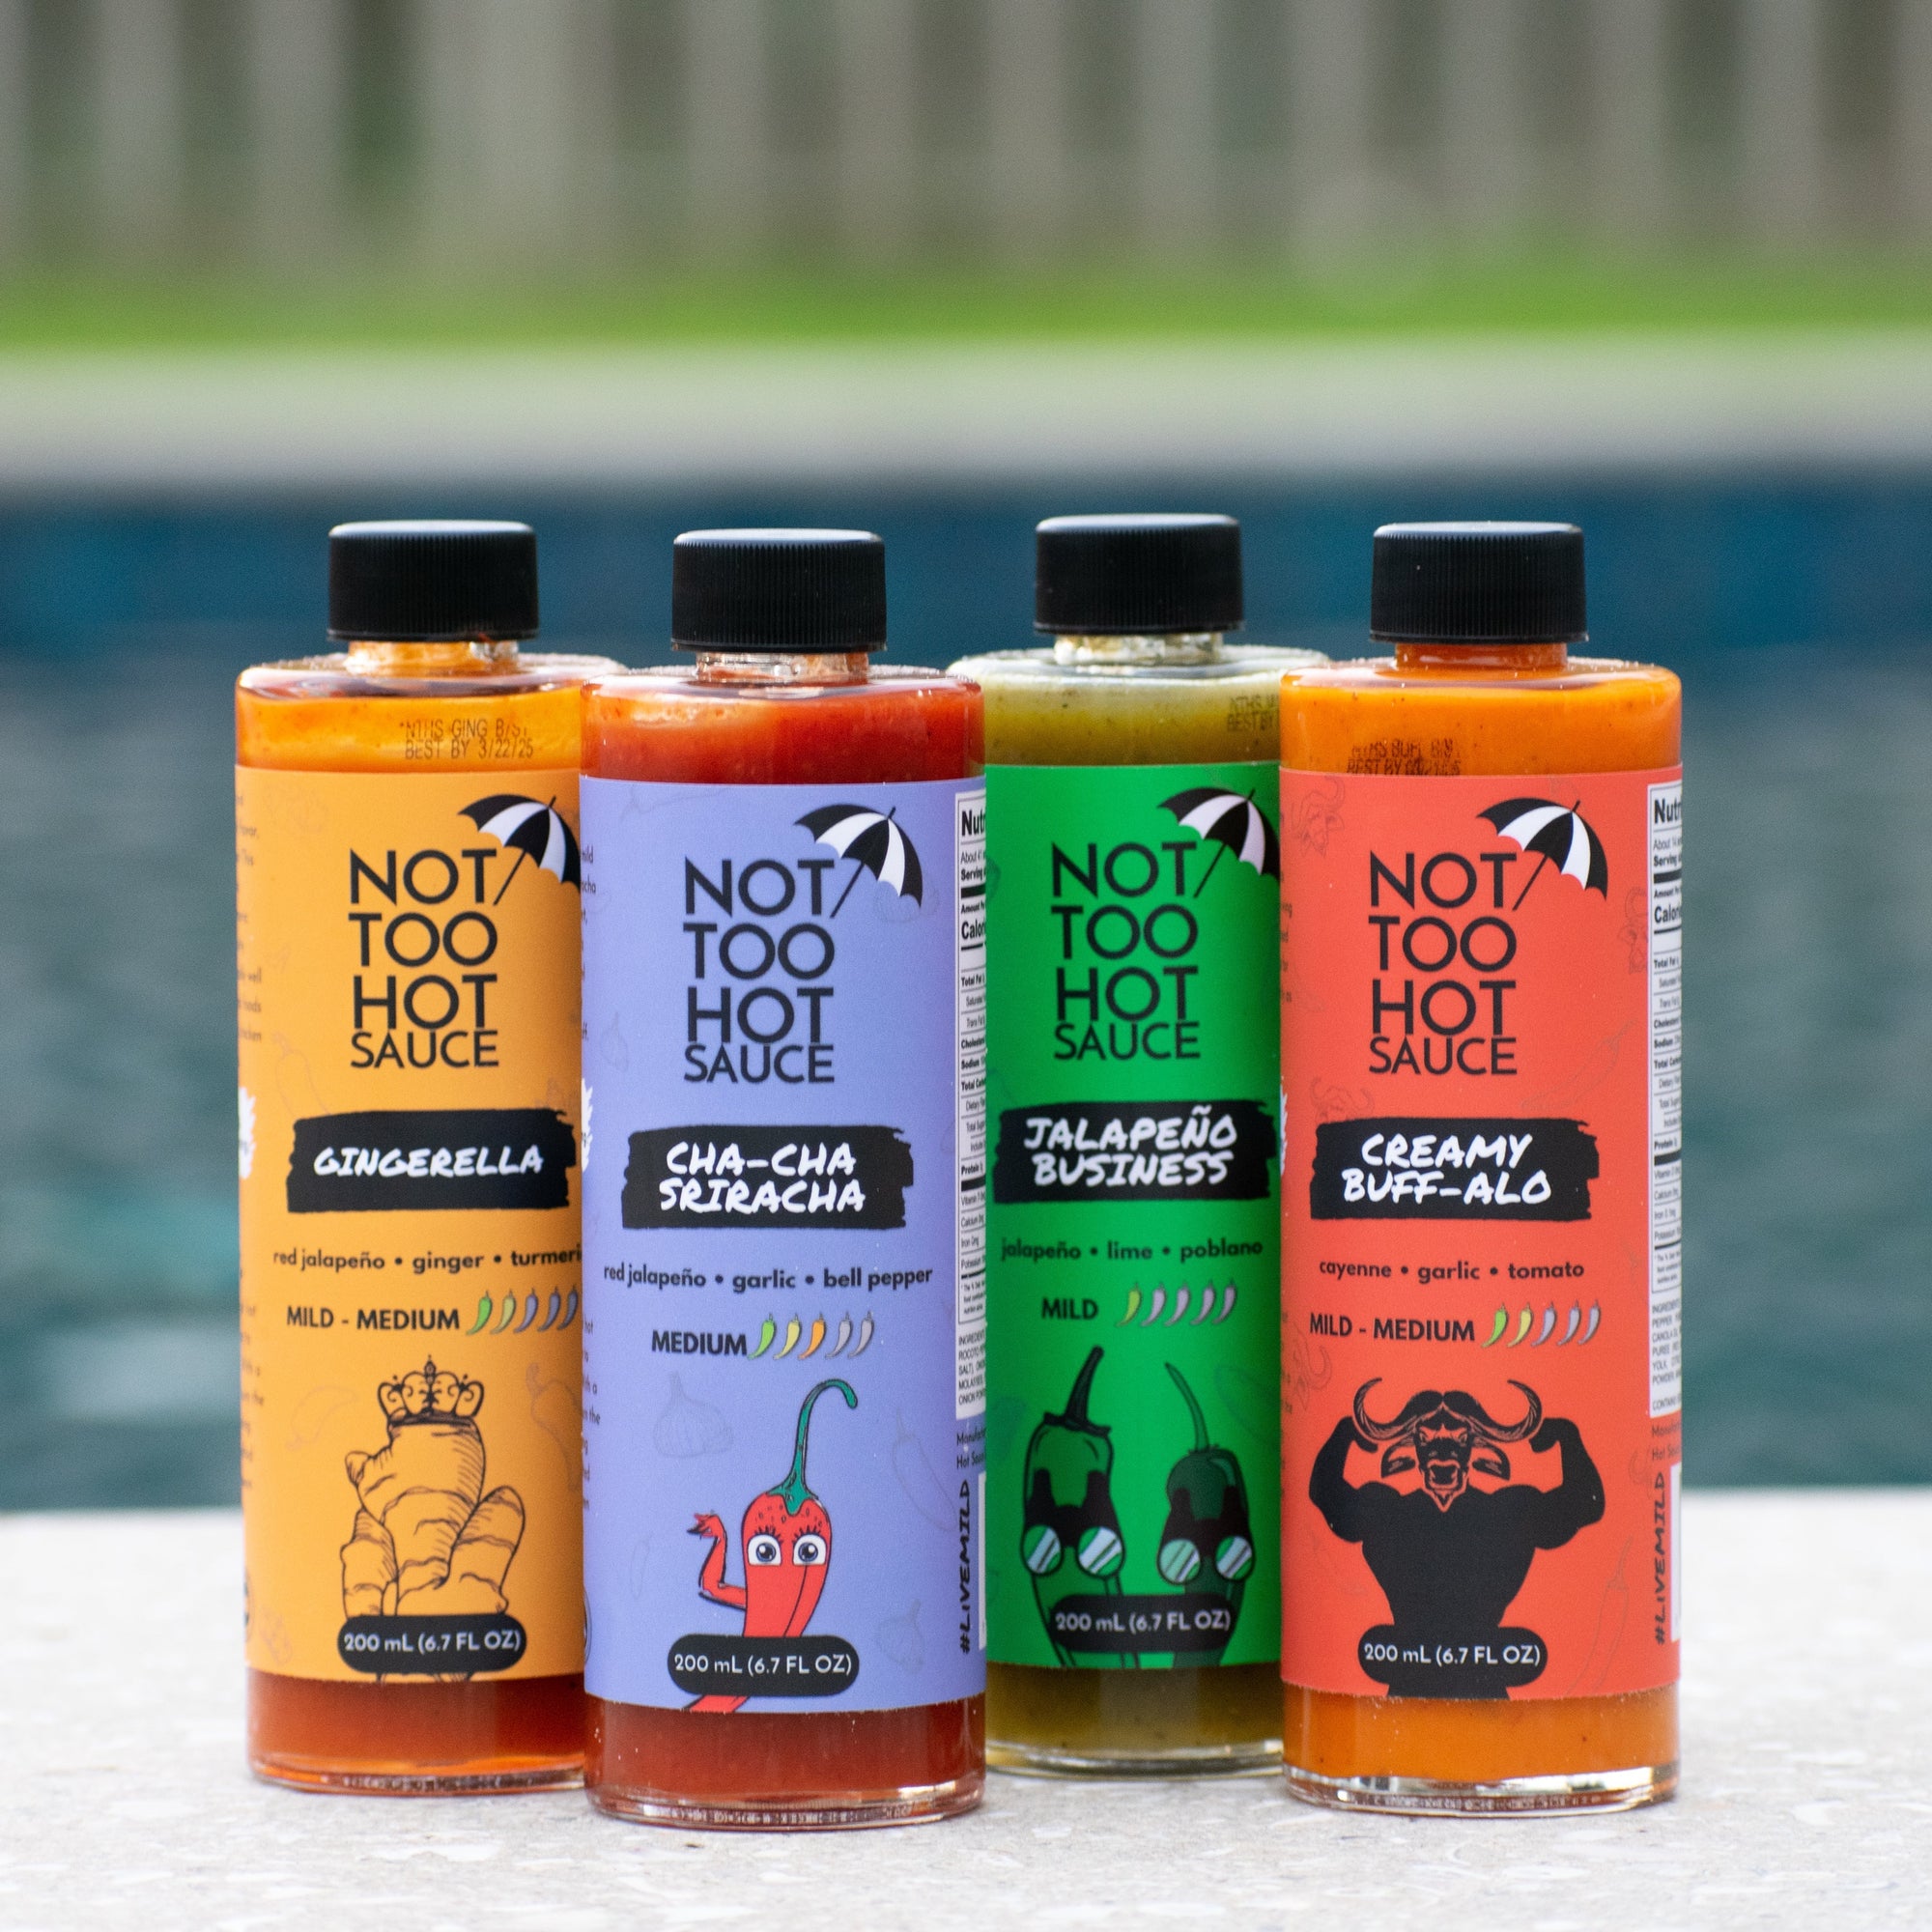 Classic Hot Sauce Variety Pack - Try for $2 per Bottle Not Too Hot Sauce